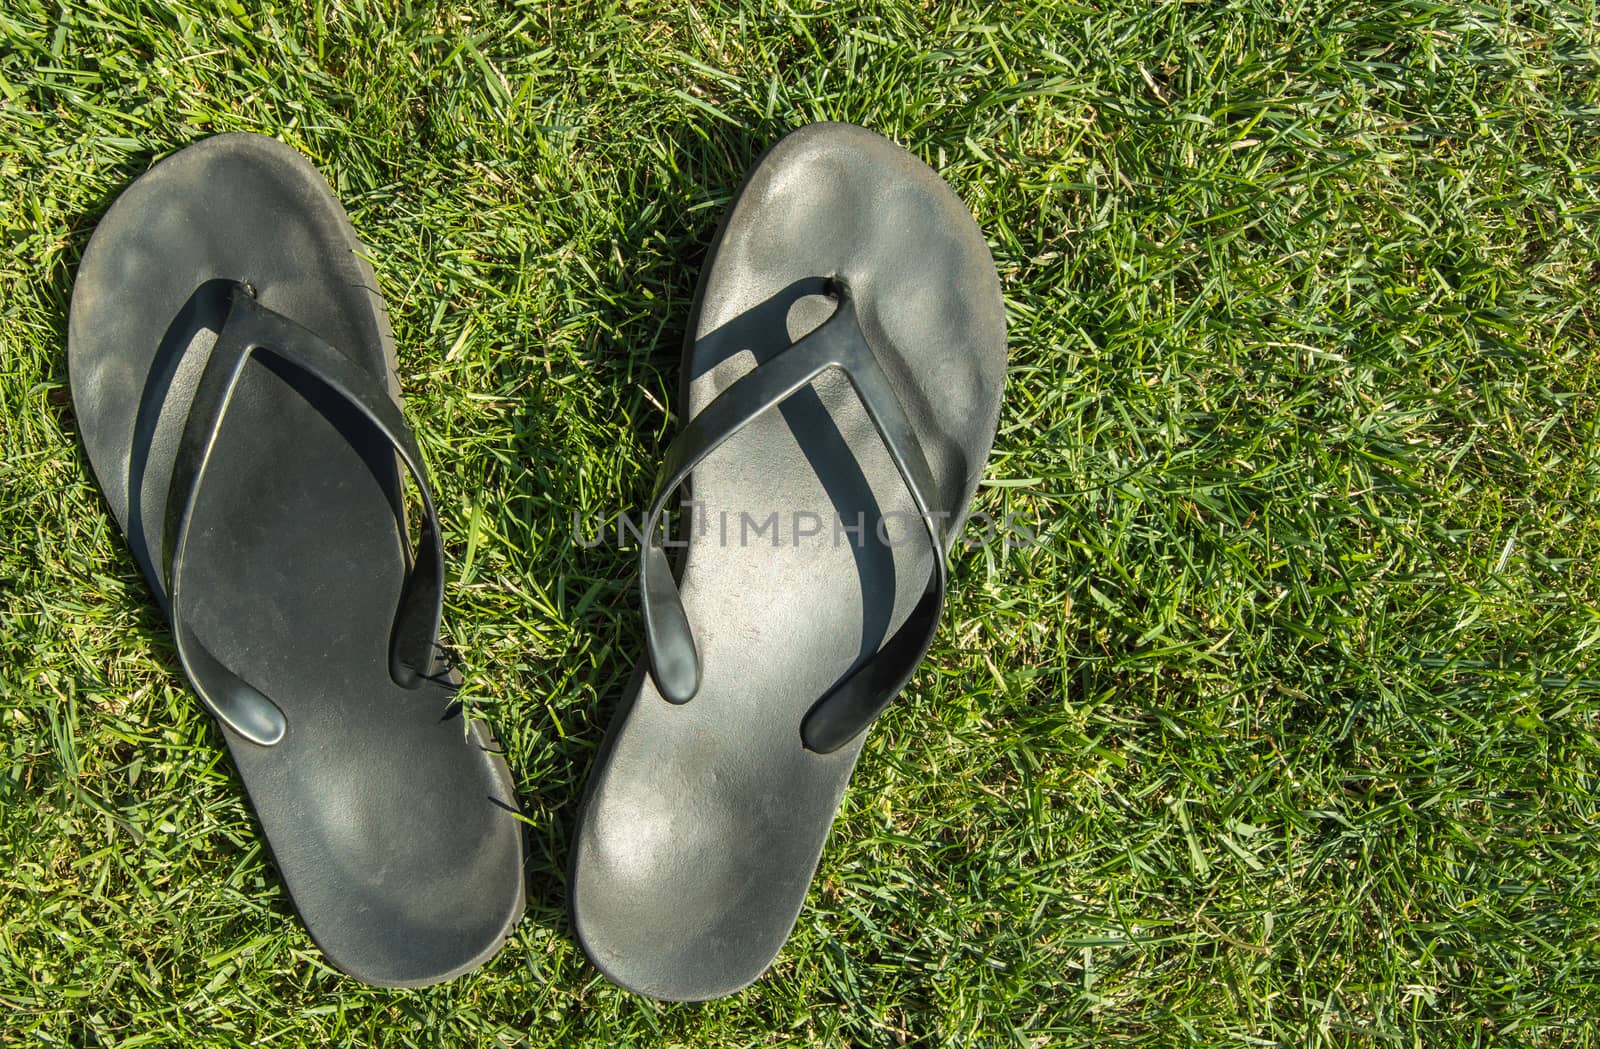 A pair of black rubber flip-flops on the green grass of the lawn with a copy of the space, in summer, outdoors.